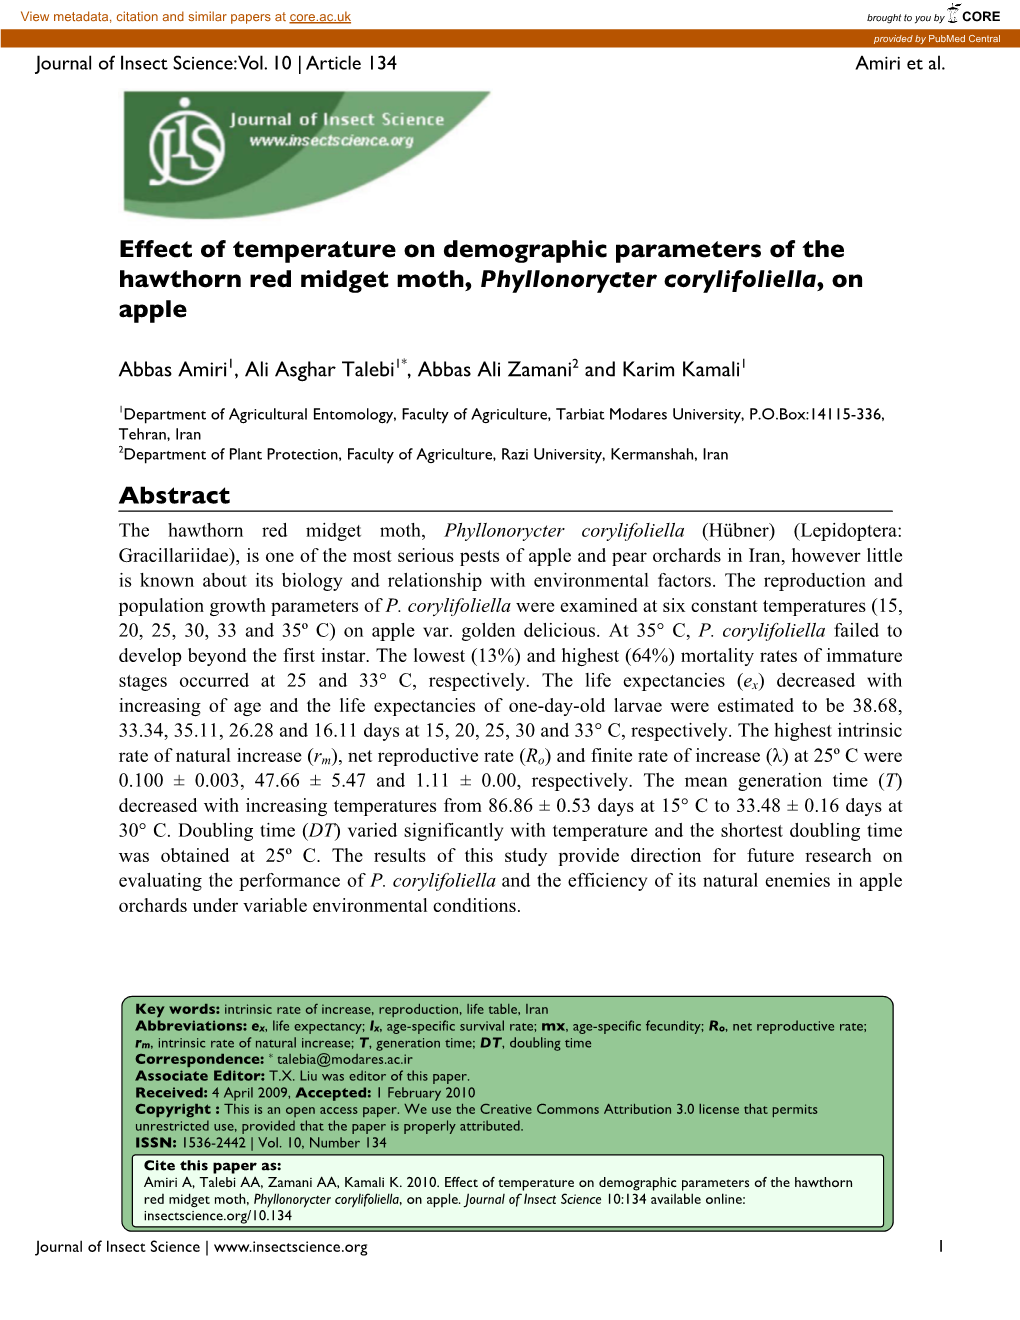 Effect of Temperature on Demographic Parameters of the Hawthorn Red Midget Moth, Phyllonorycter Corylifoliella, on Apple